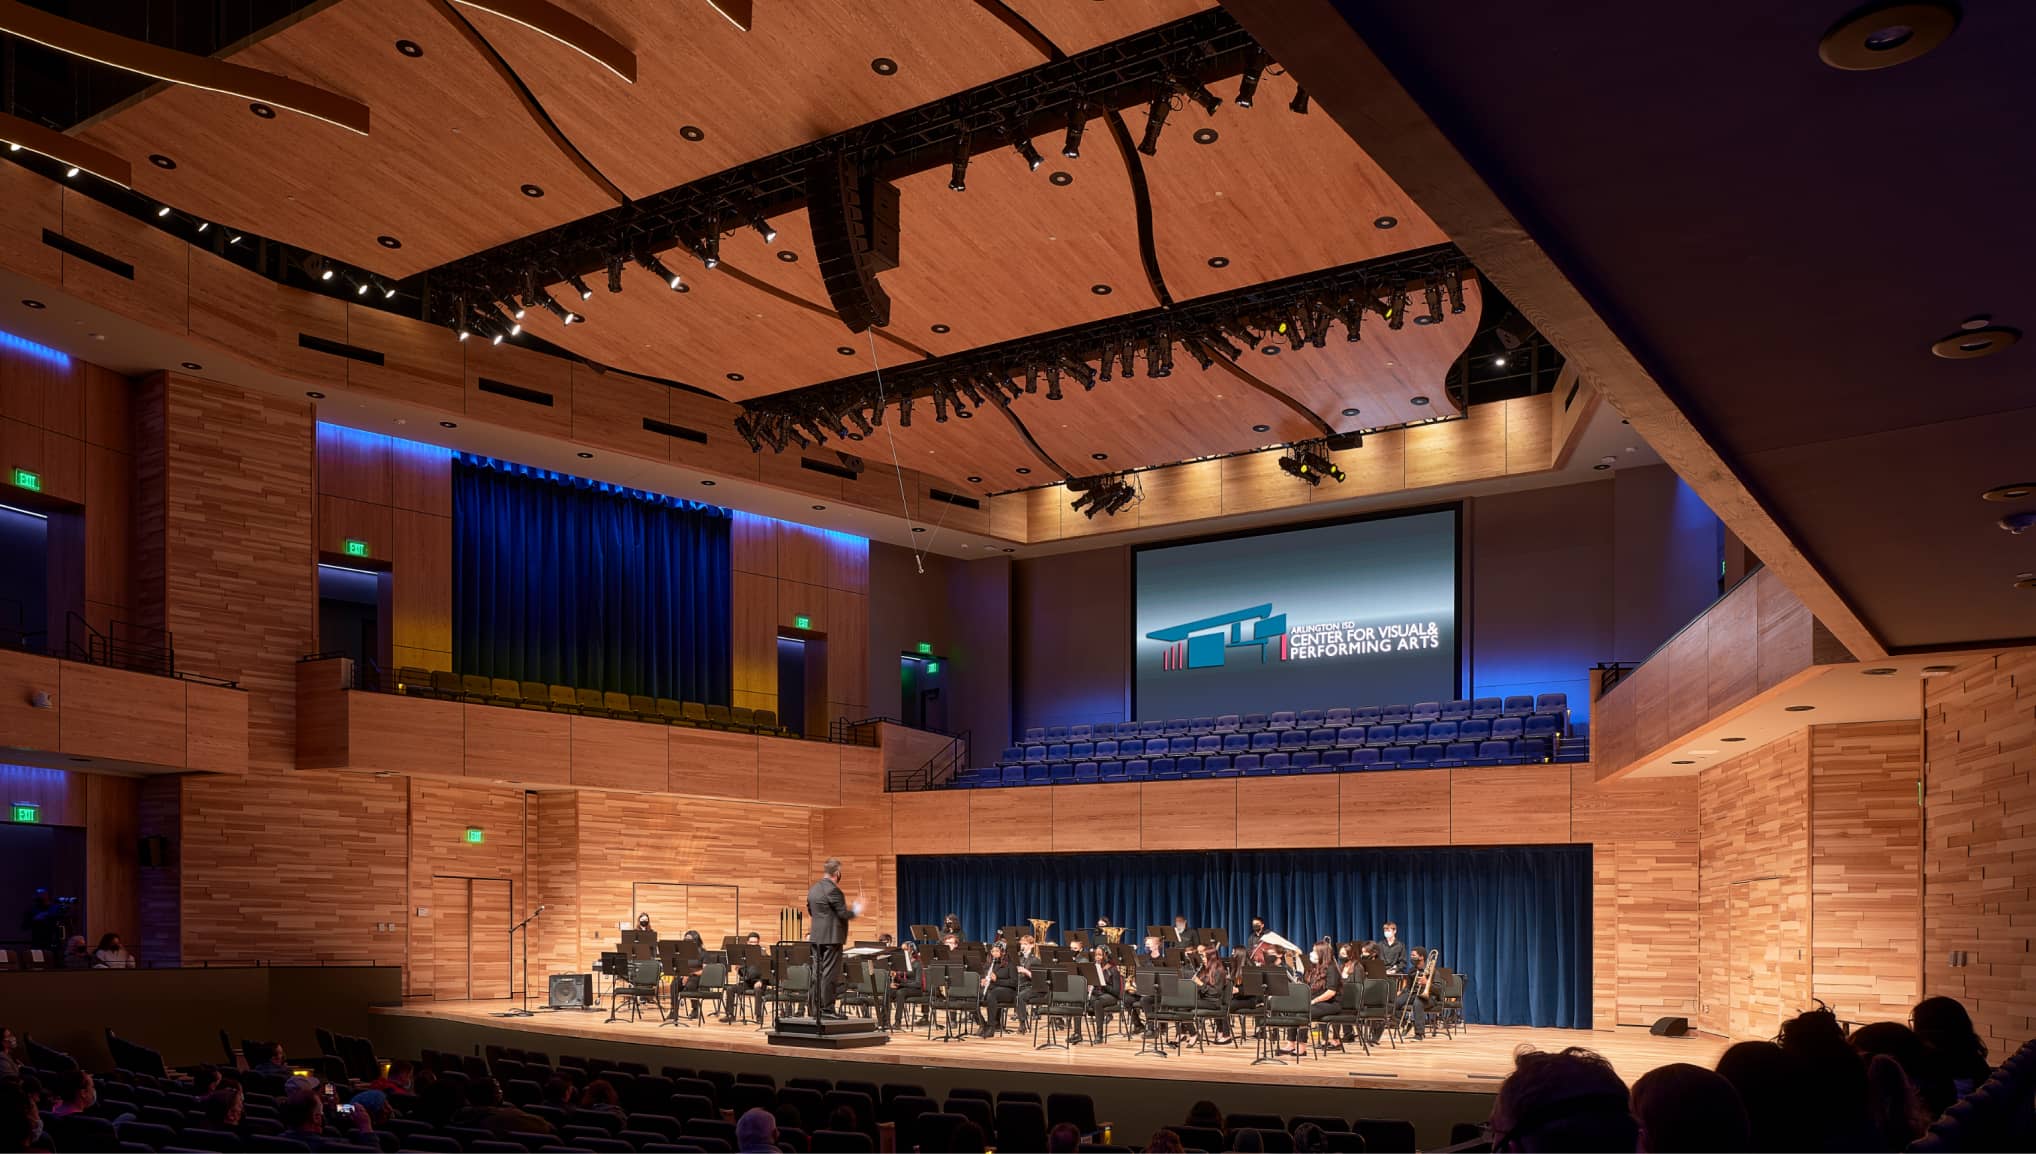 The design of the 1,200-seat concert hall at the Arlington ISD Center for Visual and Performing Arts features wood from responsibly managed forests.